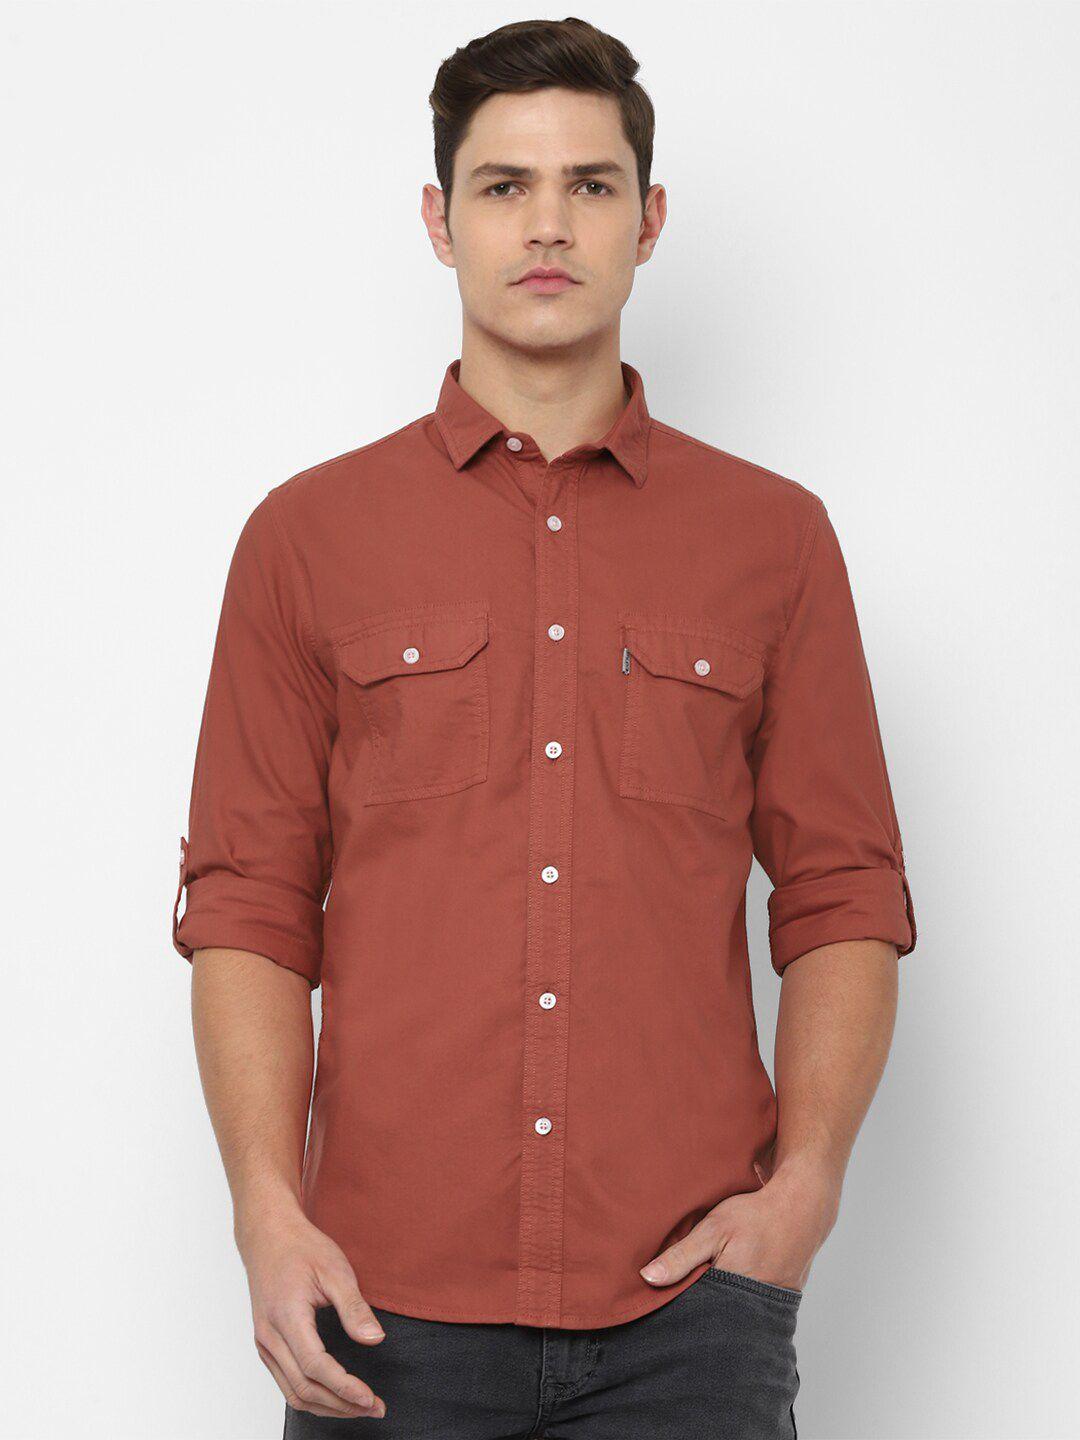 louis philippe jeans men red slim fit casual shirt